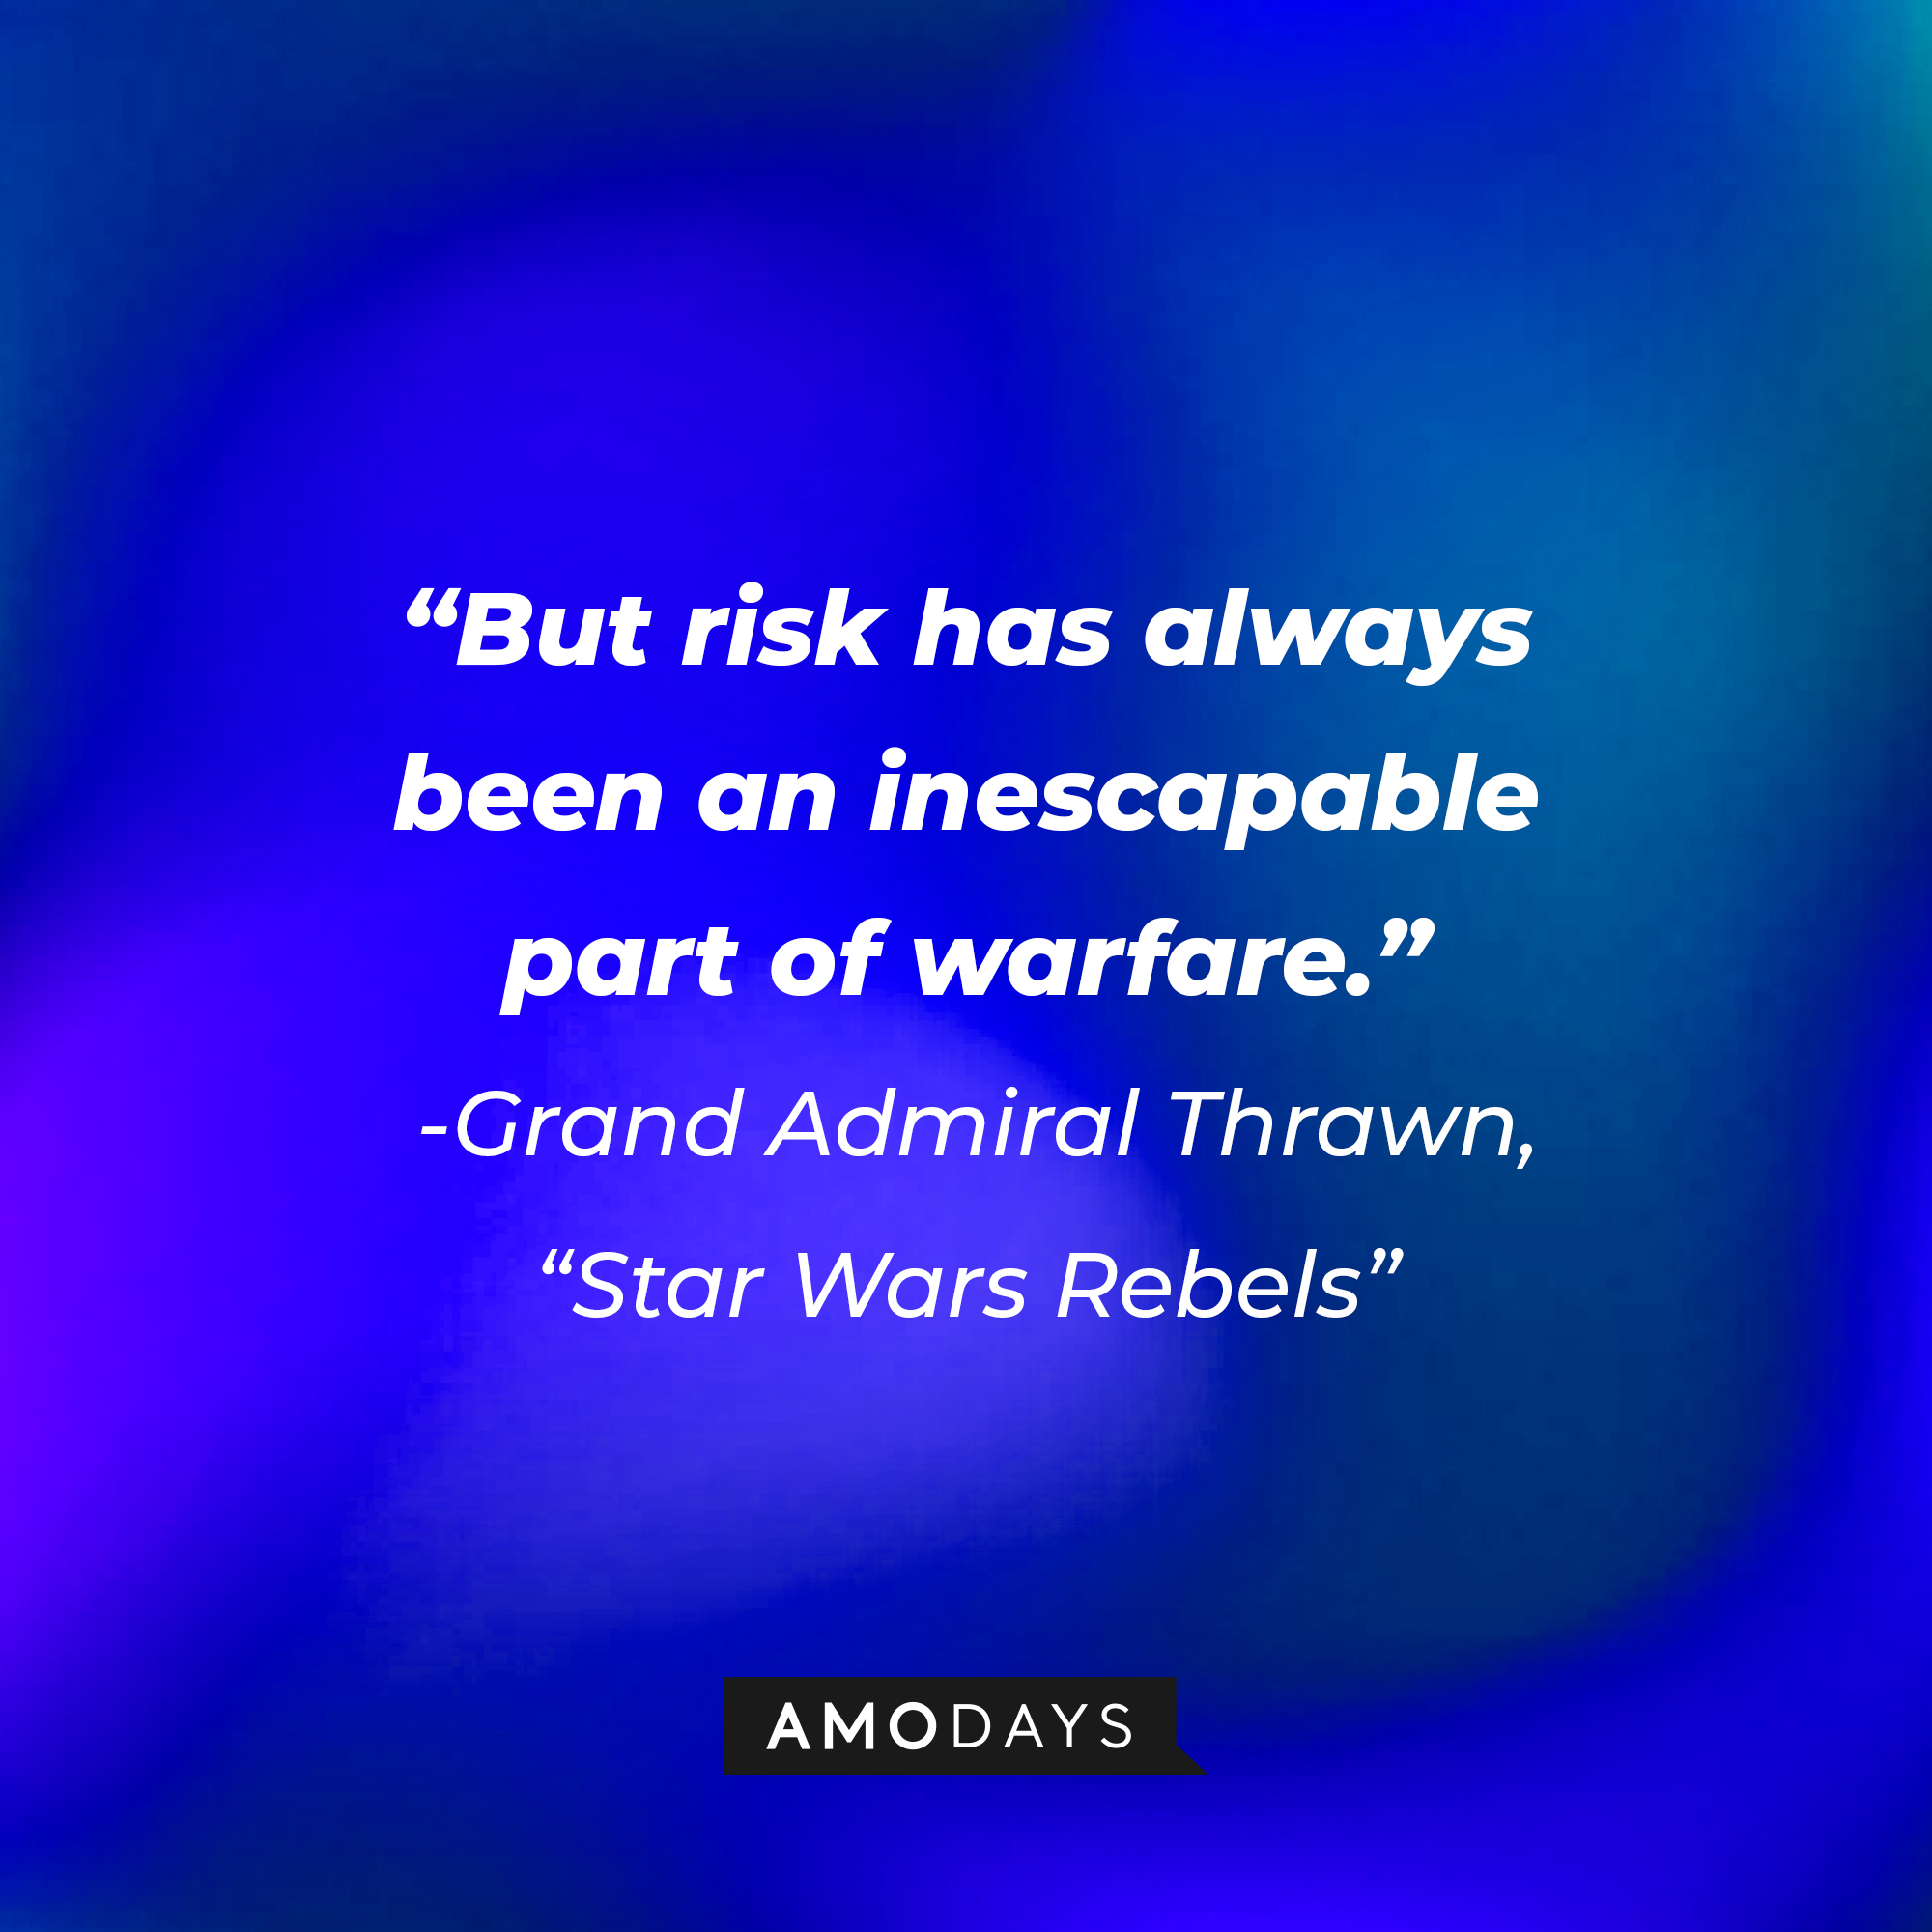 Grand Admiral Thrawn's quote: "But risk has always been an inescapable part of warfare." | Source: AmoDays